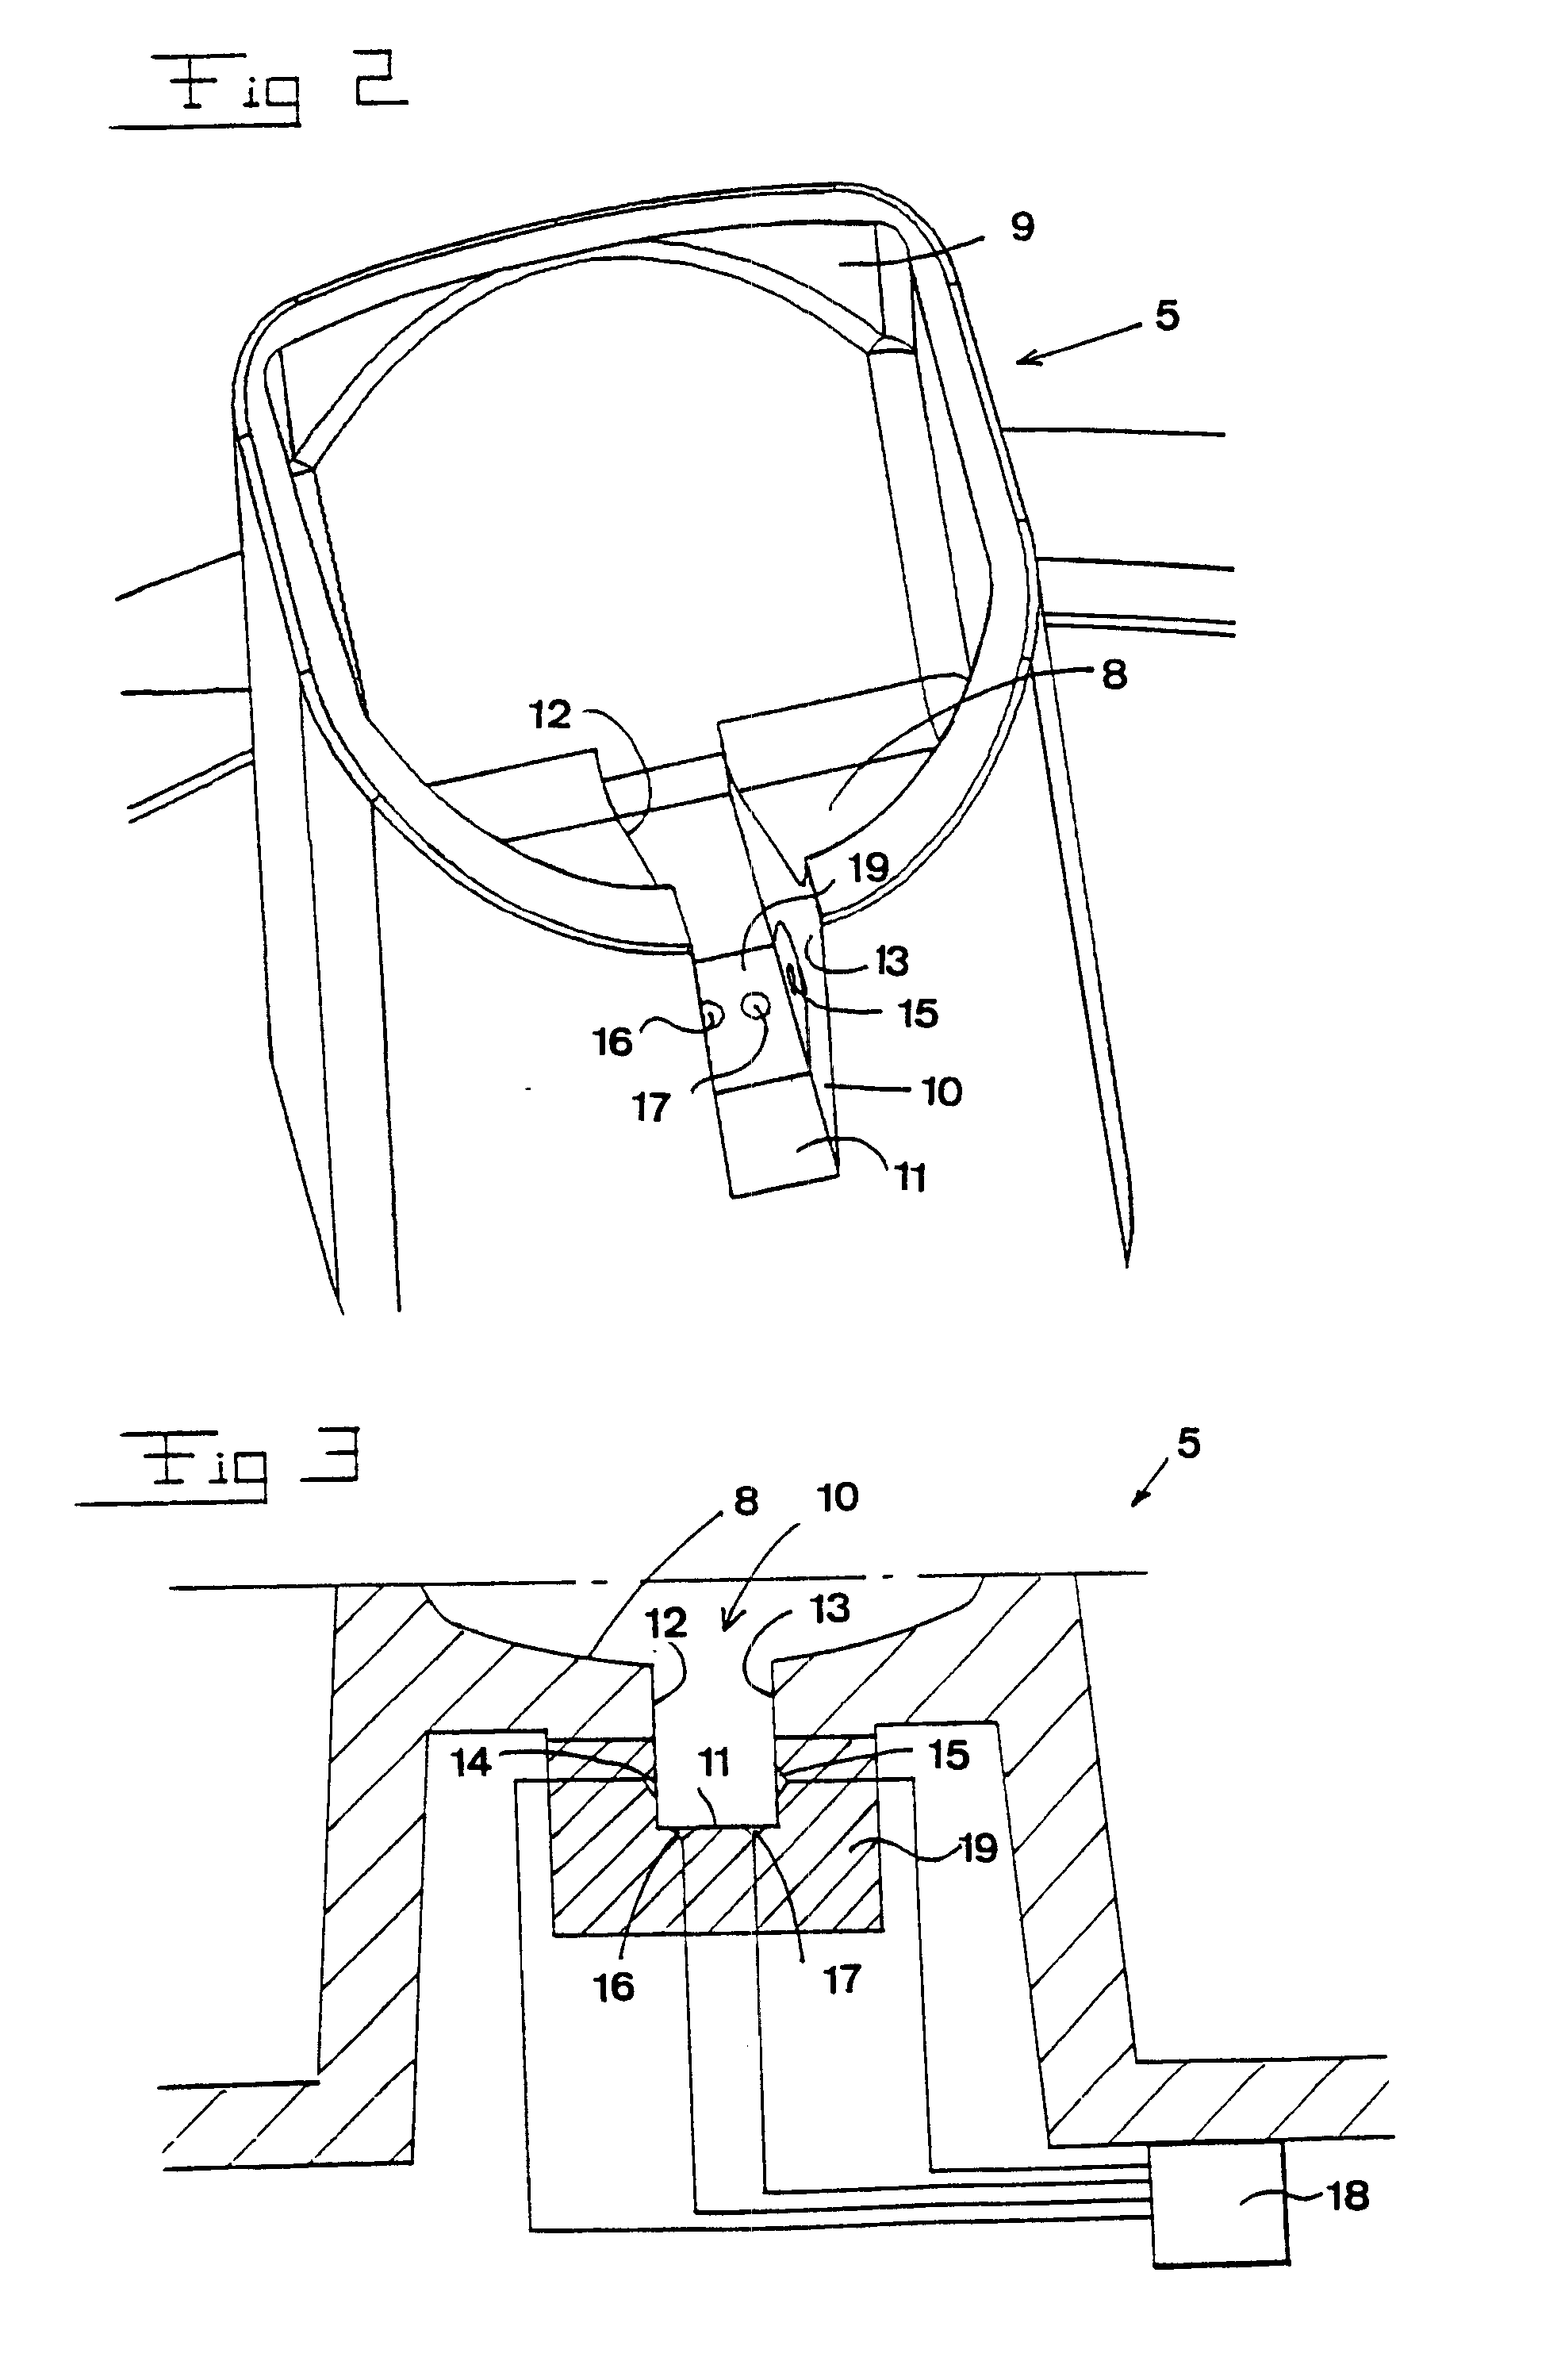 Device for measuring an electrical parameter in the milk